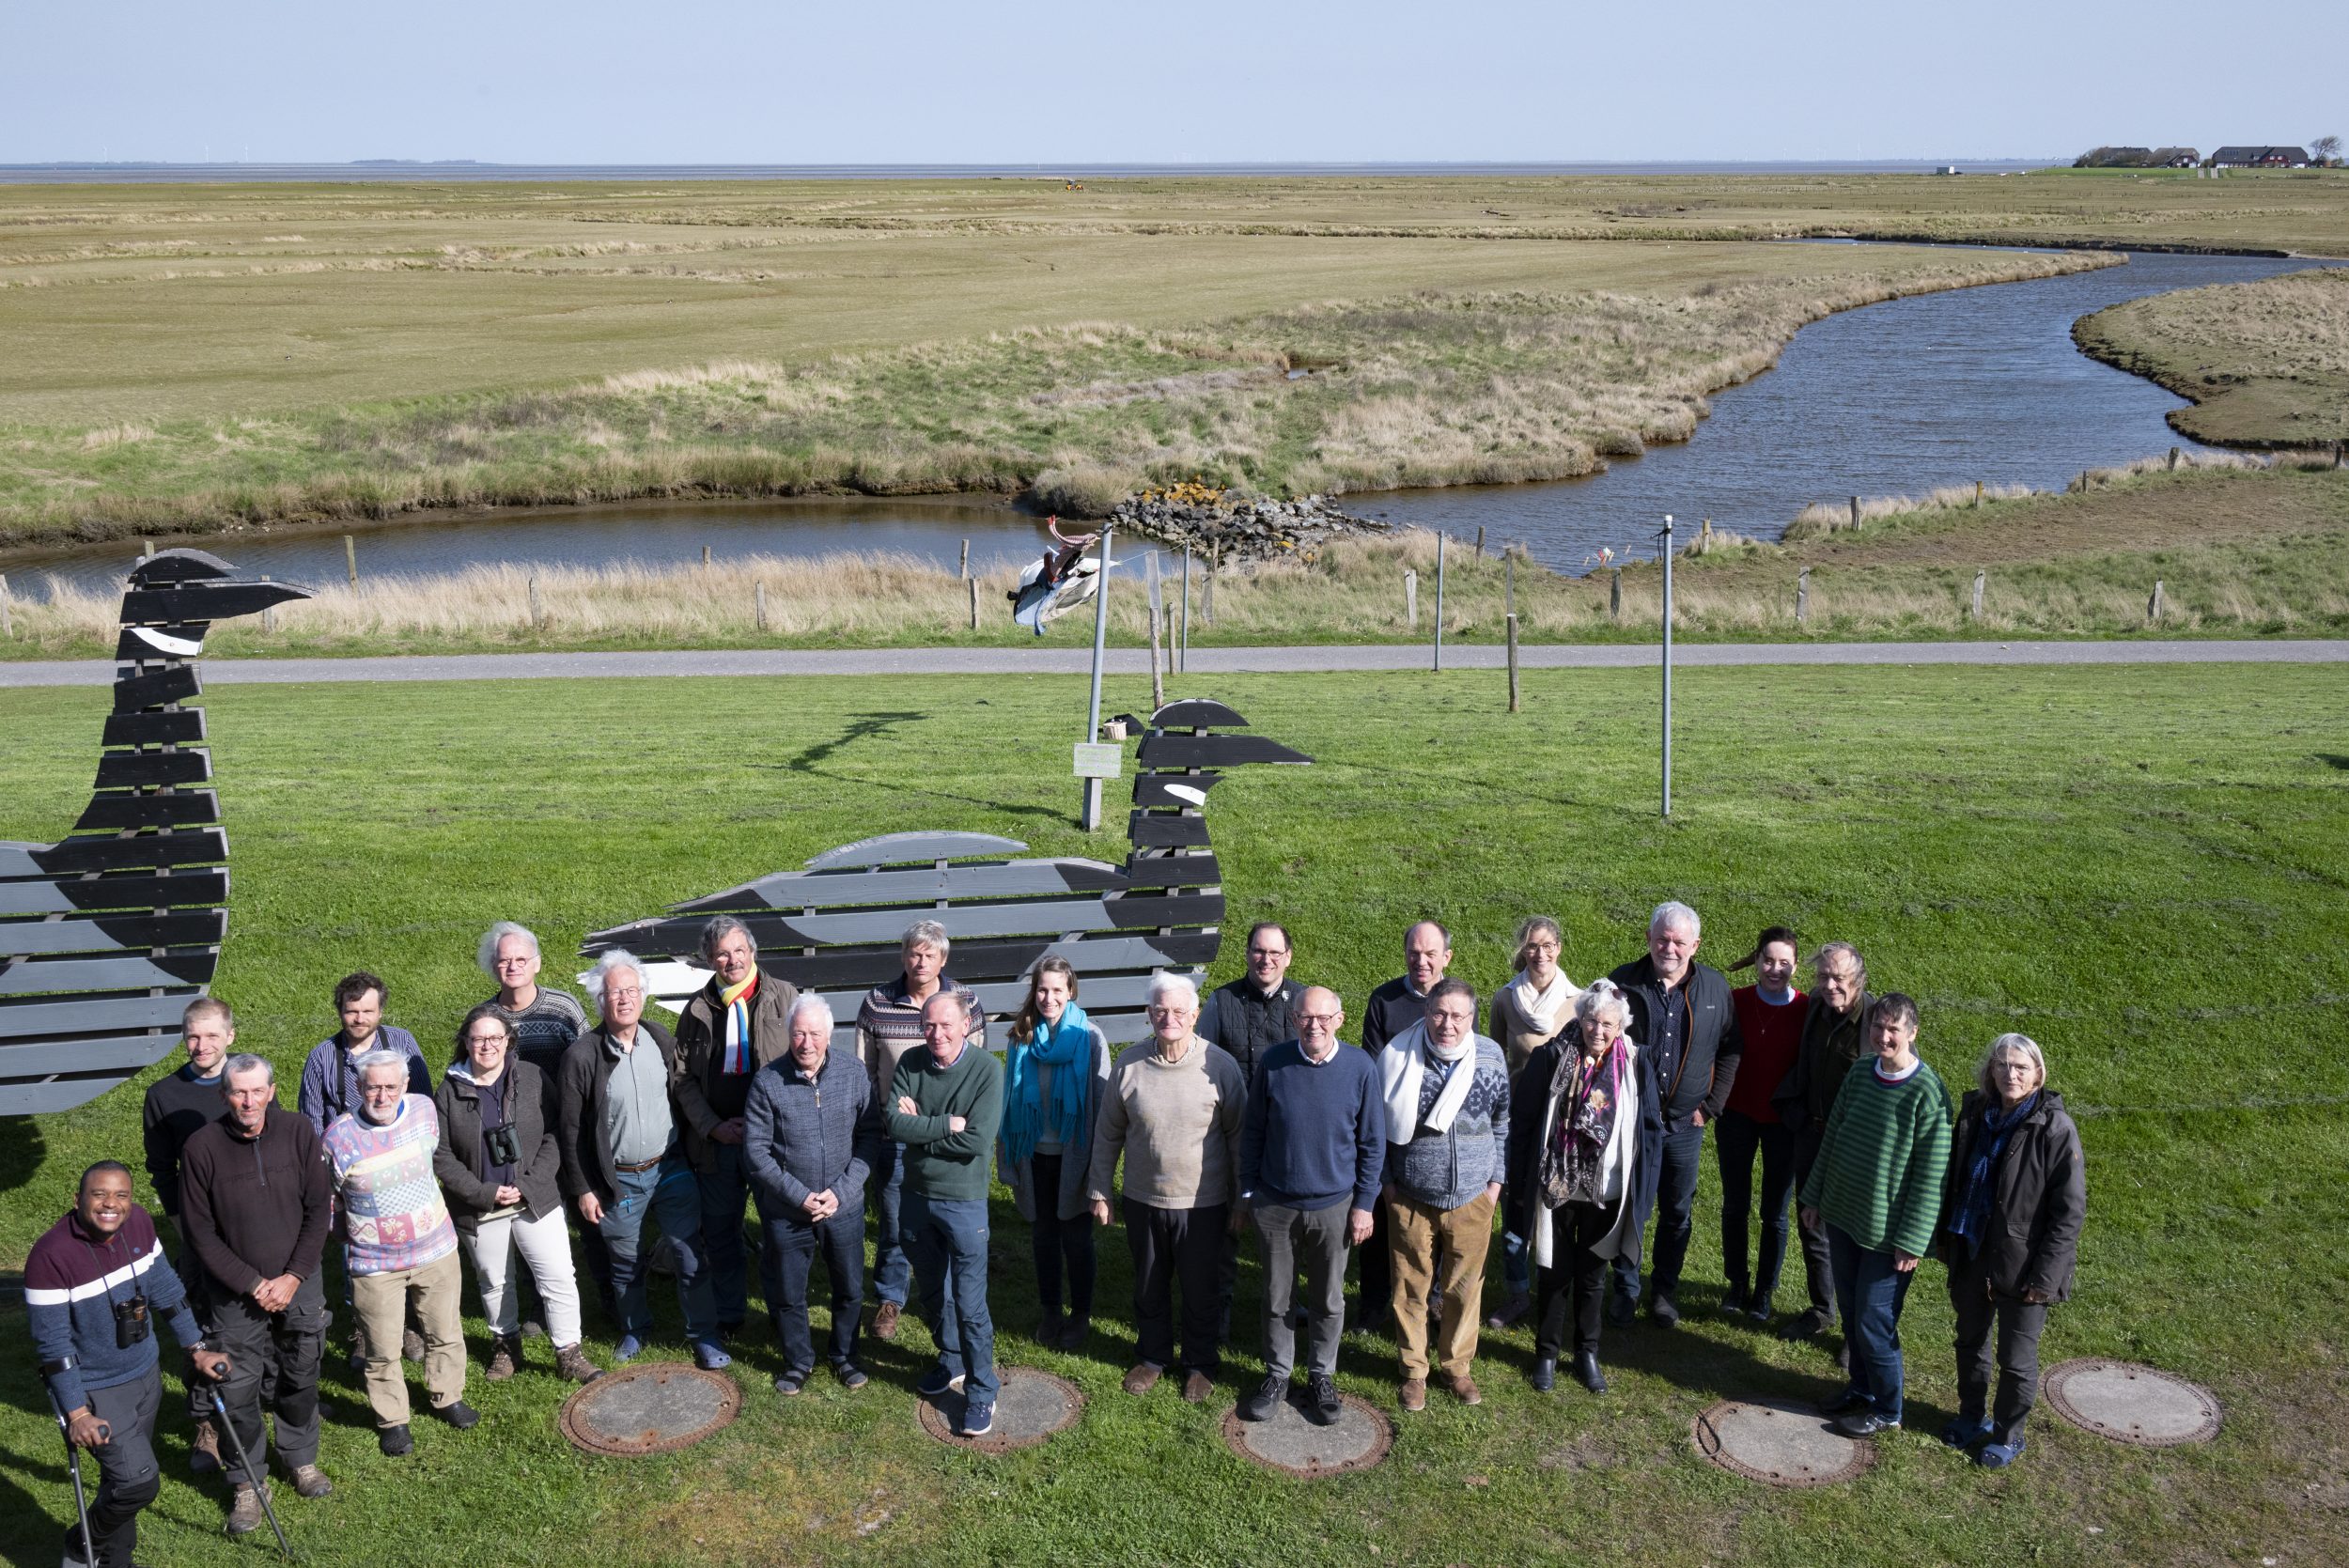 Ornithologists and nature conservationists of 9 countries meeting April 2023 on Hallig Langeneß for the "East Atlantic Flyway Week"